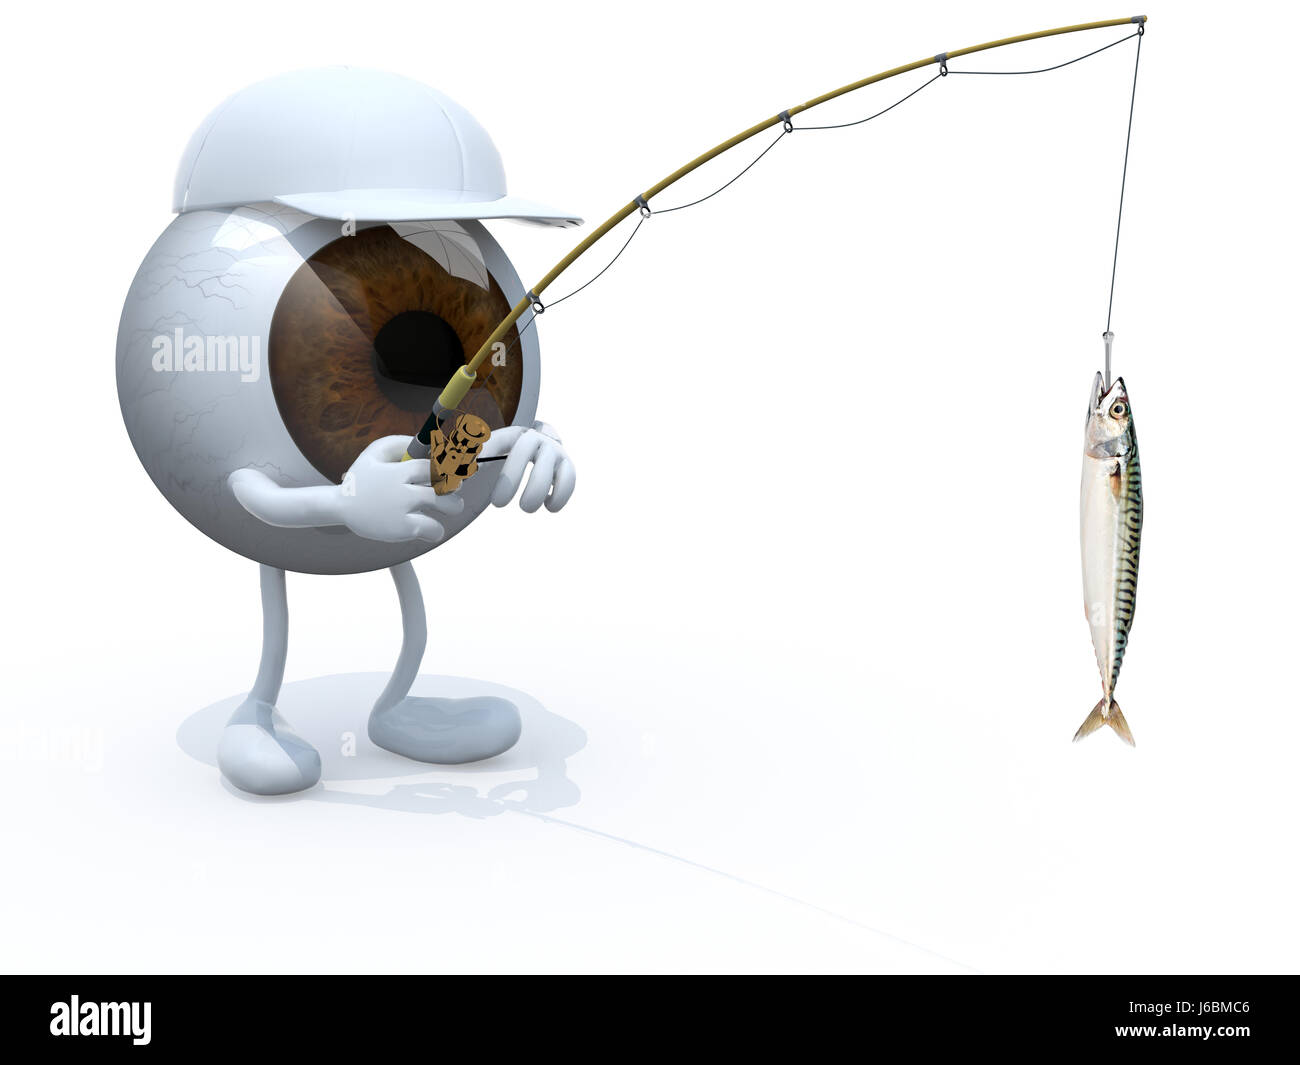 big eyeball with arms, legs, fishing pole on hand and fish on hook, 3d illustration Stock Photo